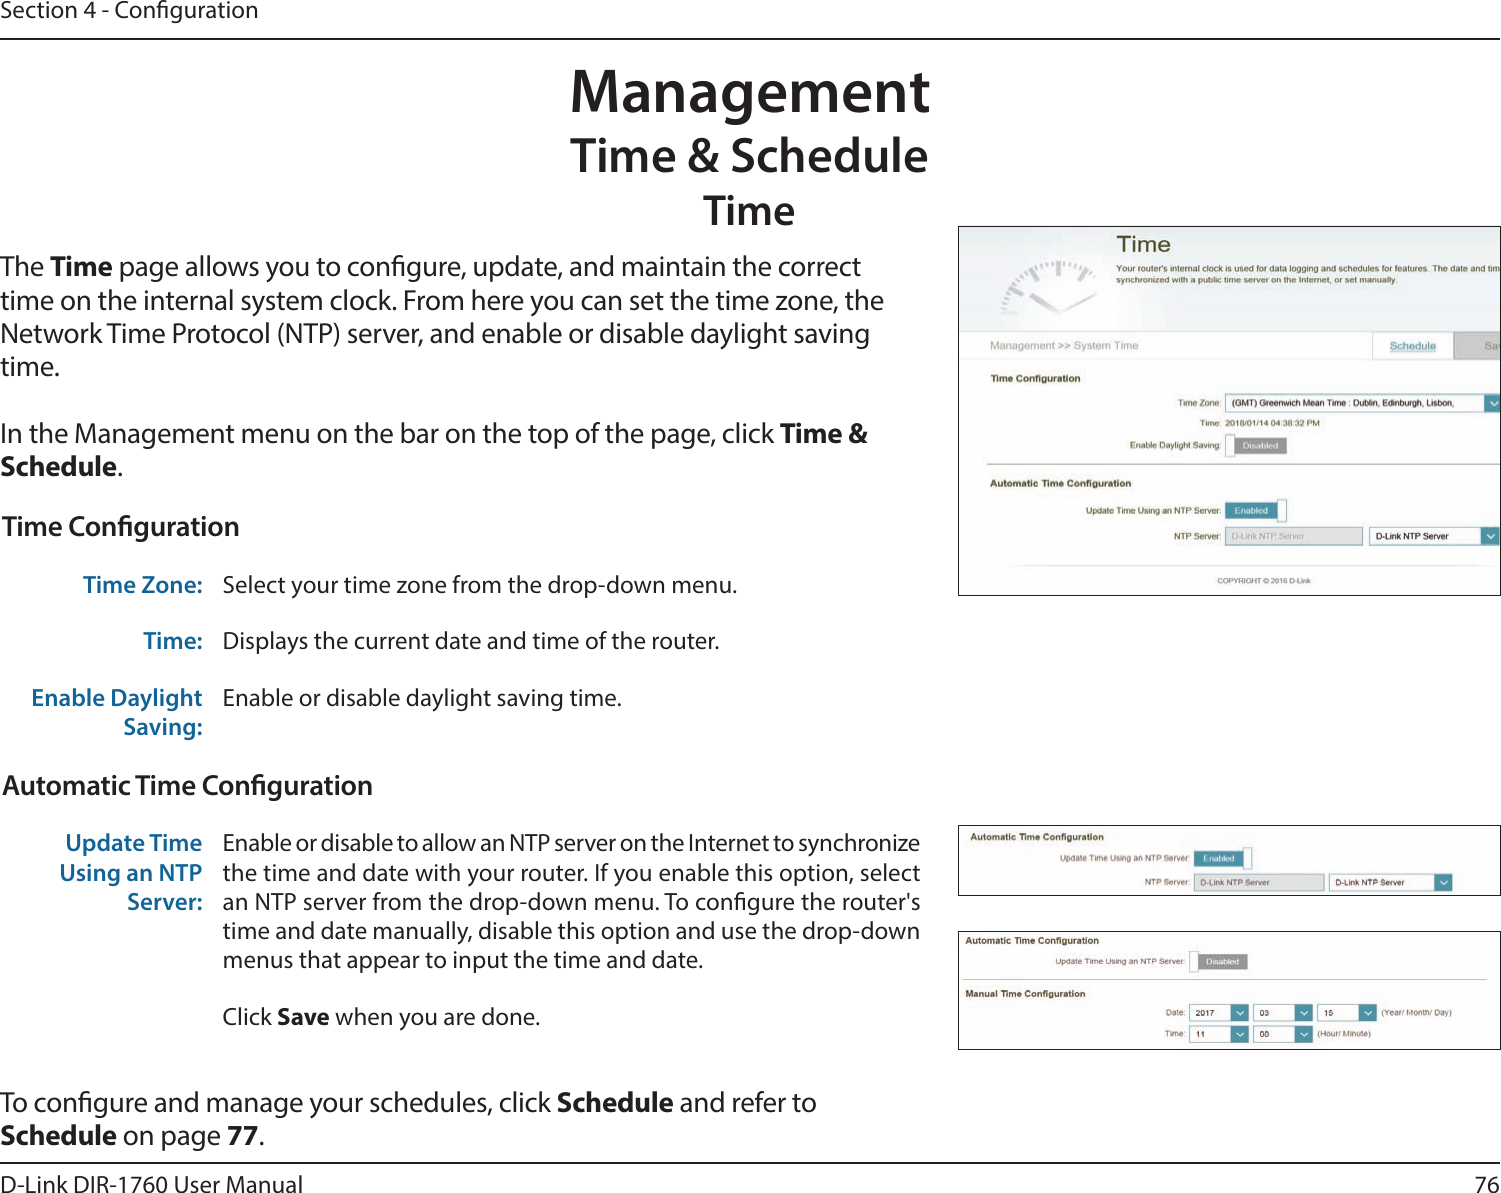 76D-Link DIR-1760 User ManualSection 4 - CongurationManagementTime &amp; ScheduleTimeThe Time page allows you to congure, update, and maintain the correct time on the internal system clock. From here you can set the time zone, the Network Time Protocol (NTP) server, and enable or disable daylight saving time.In the Management menu on the bar on the top of the page, click Time &amp; Schedule.To congure and manage your schedules, click Schedule and refer to Schedule on page 77.Time CongurationTime Zone: Select your time zone from the drop-down menu.Time: Displays the current date and time of the router.Enable Daylight Saving:Enable or disable daylight saving time.Automatic Time CongurationUpdate Time Using an NTP Server:Enable or disable to allow an NTP server on the Internet to synchronize the time and date with your router. If you enable this option, select an NTP server from the drop-down menu. To congure the router&apos;s time and date manually, disable this option and use the drop-down menus that appear to input the time and date.Click Save when you are done.